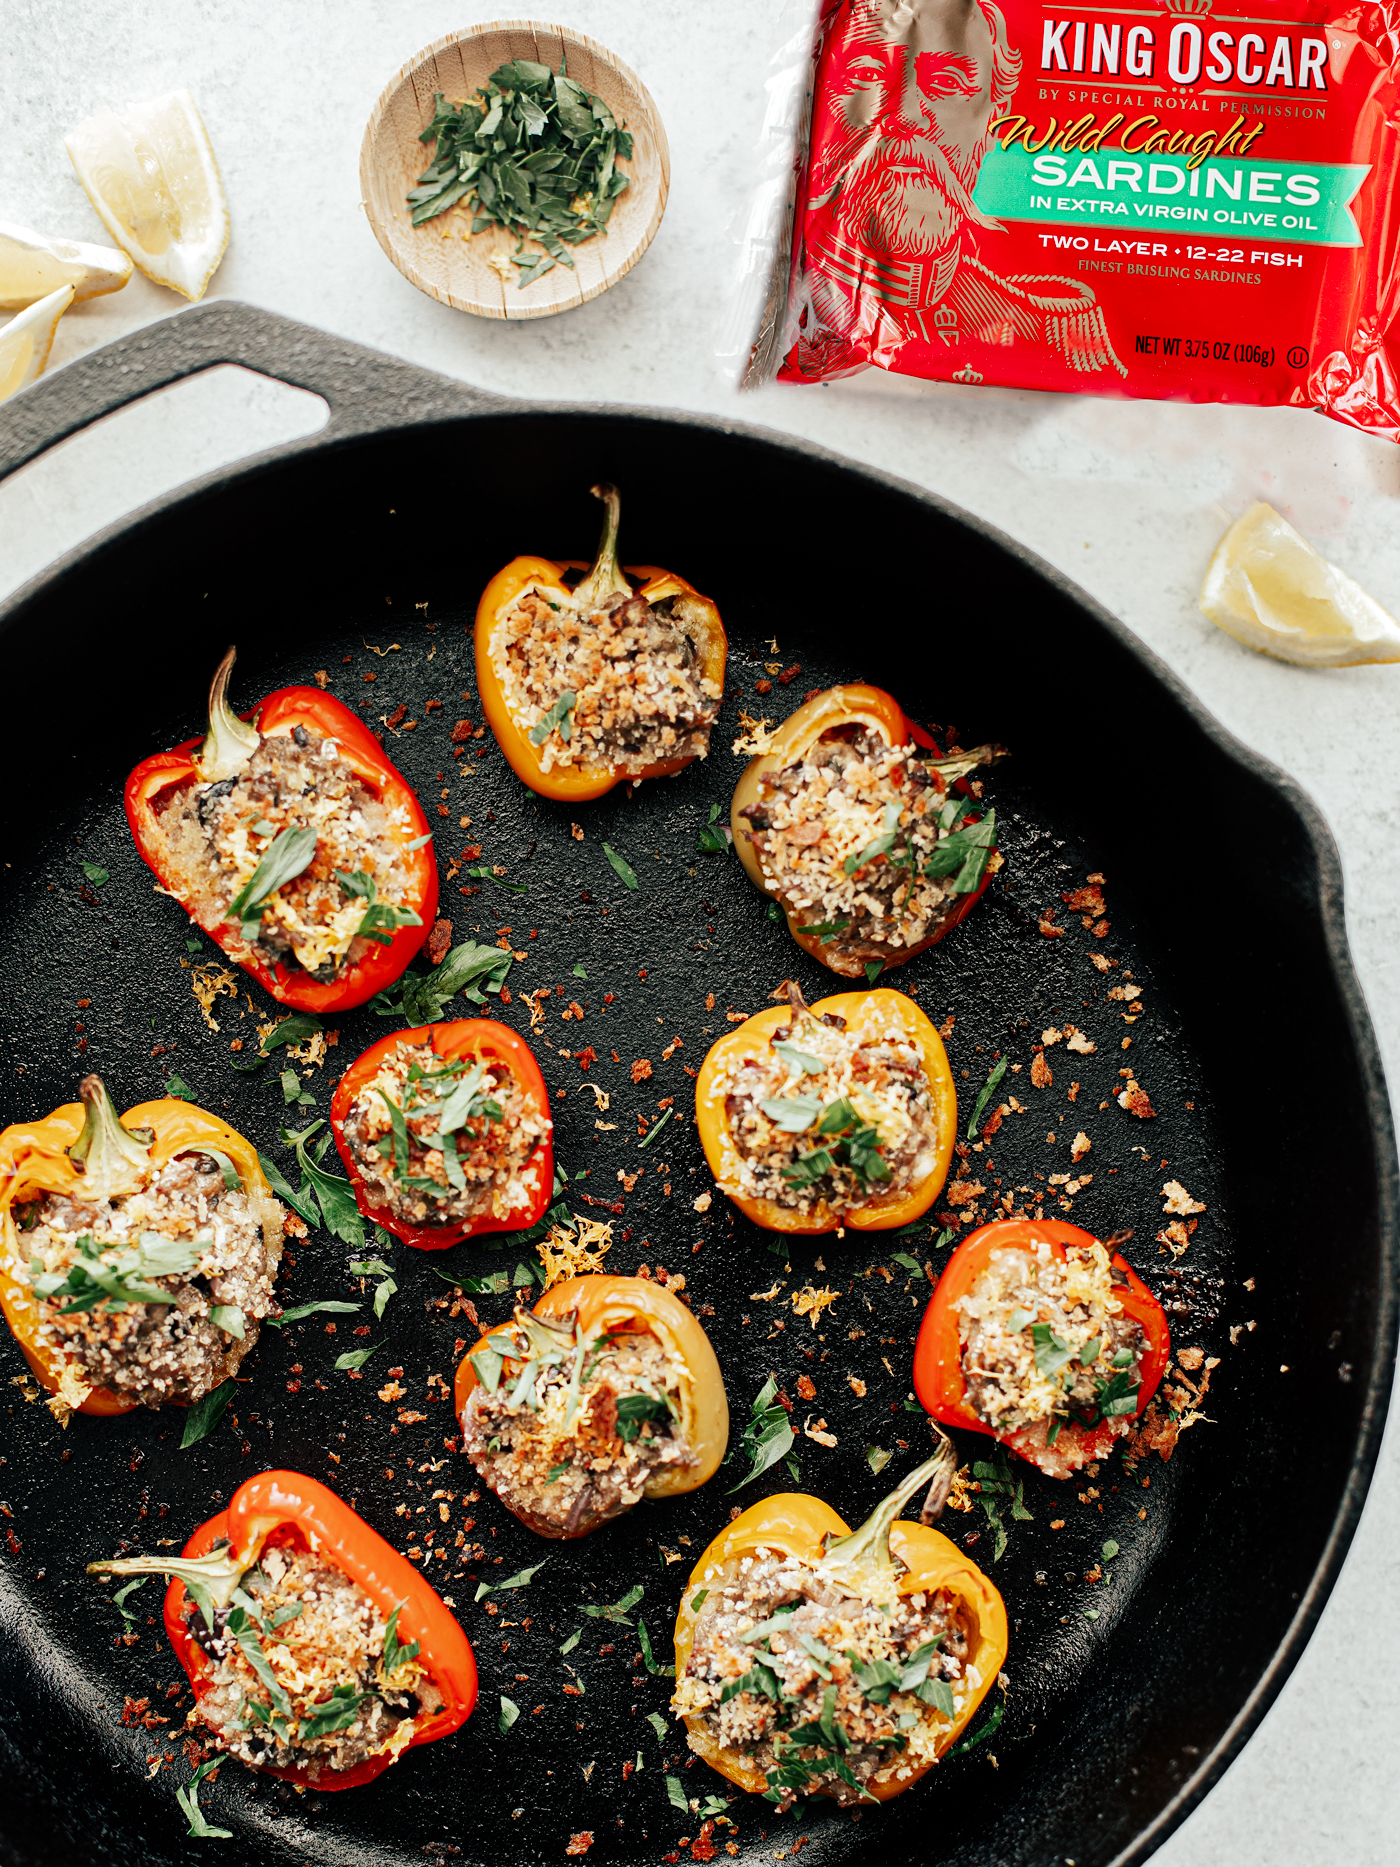 Cast iron pan with baked stuffed mini peppers covered in toasted breadcrumbs and tin of King Oscar sardines.